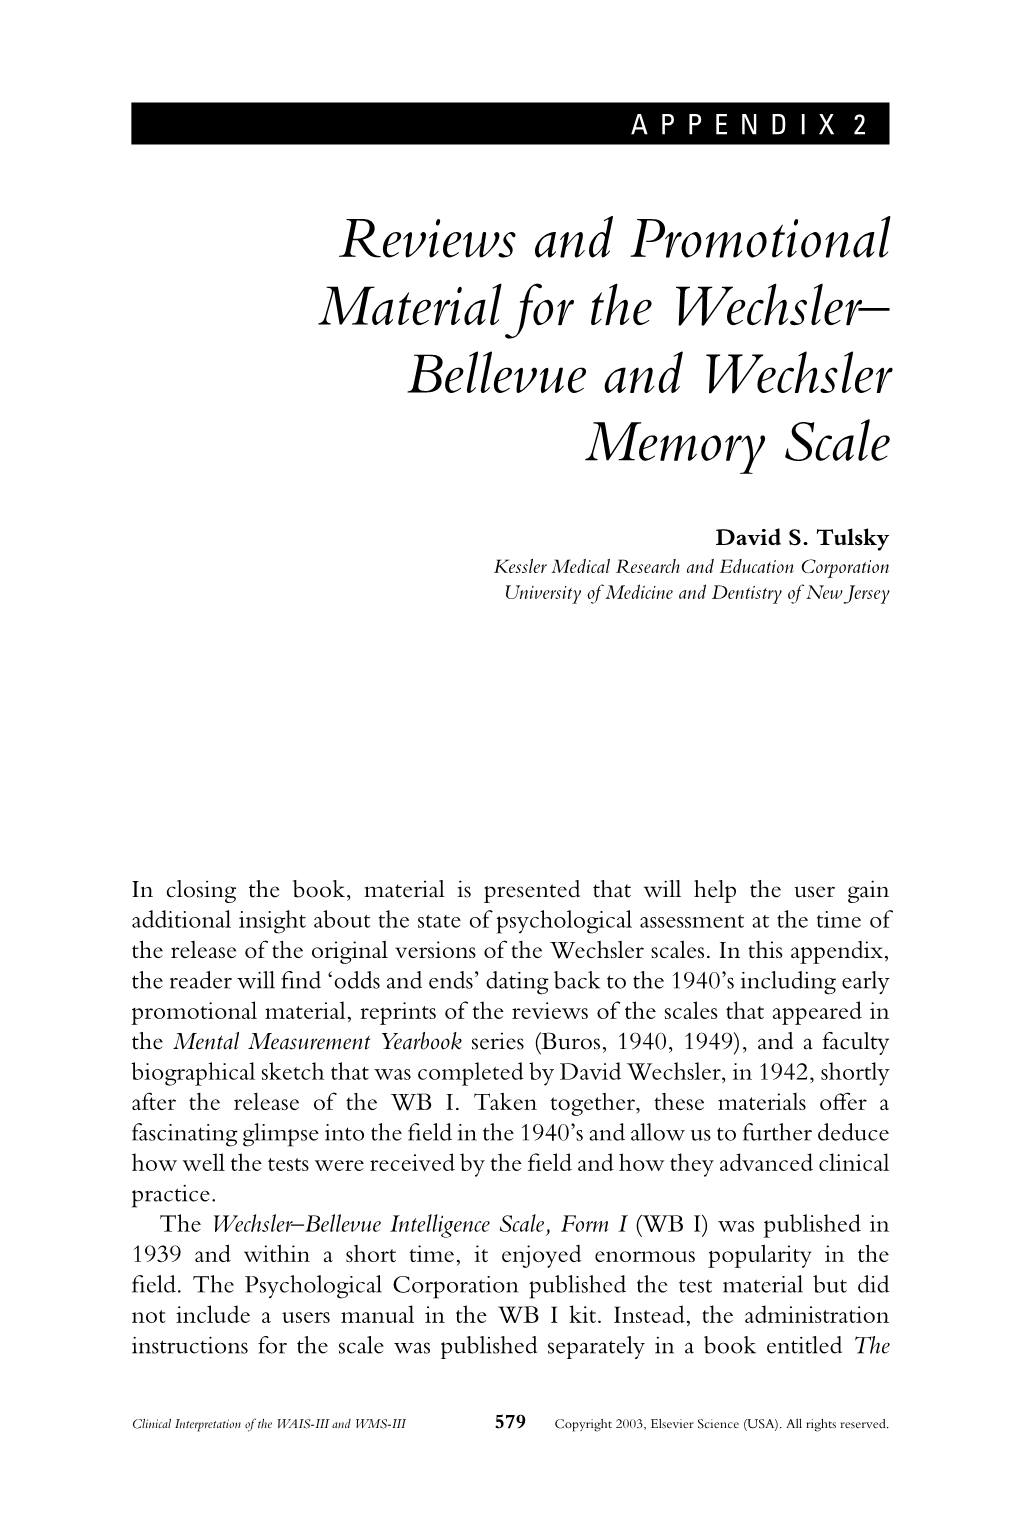 Reviews and Promotional Material for the Wechsler± Bellevue and Wechsler Memory Scale